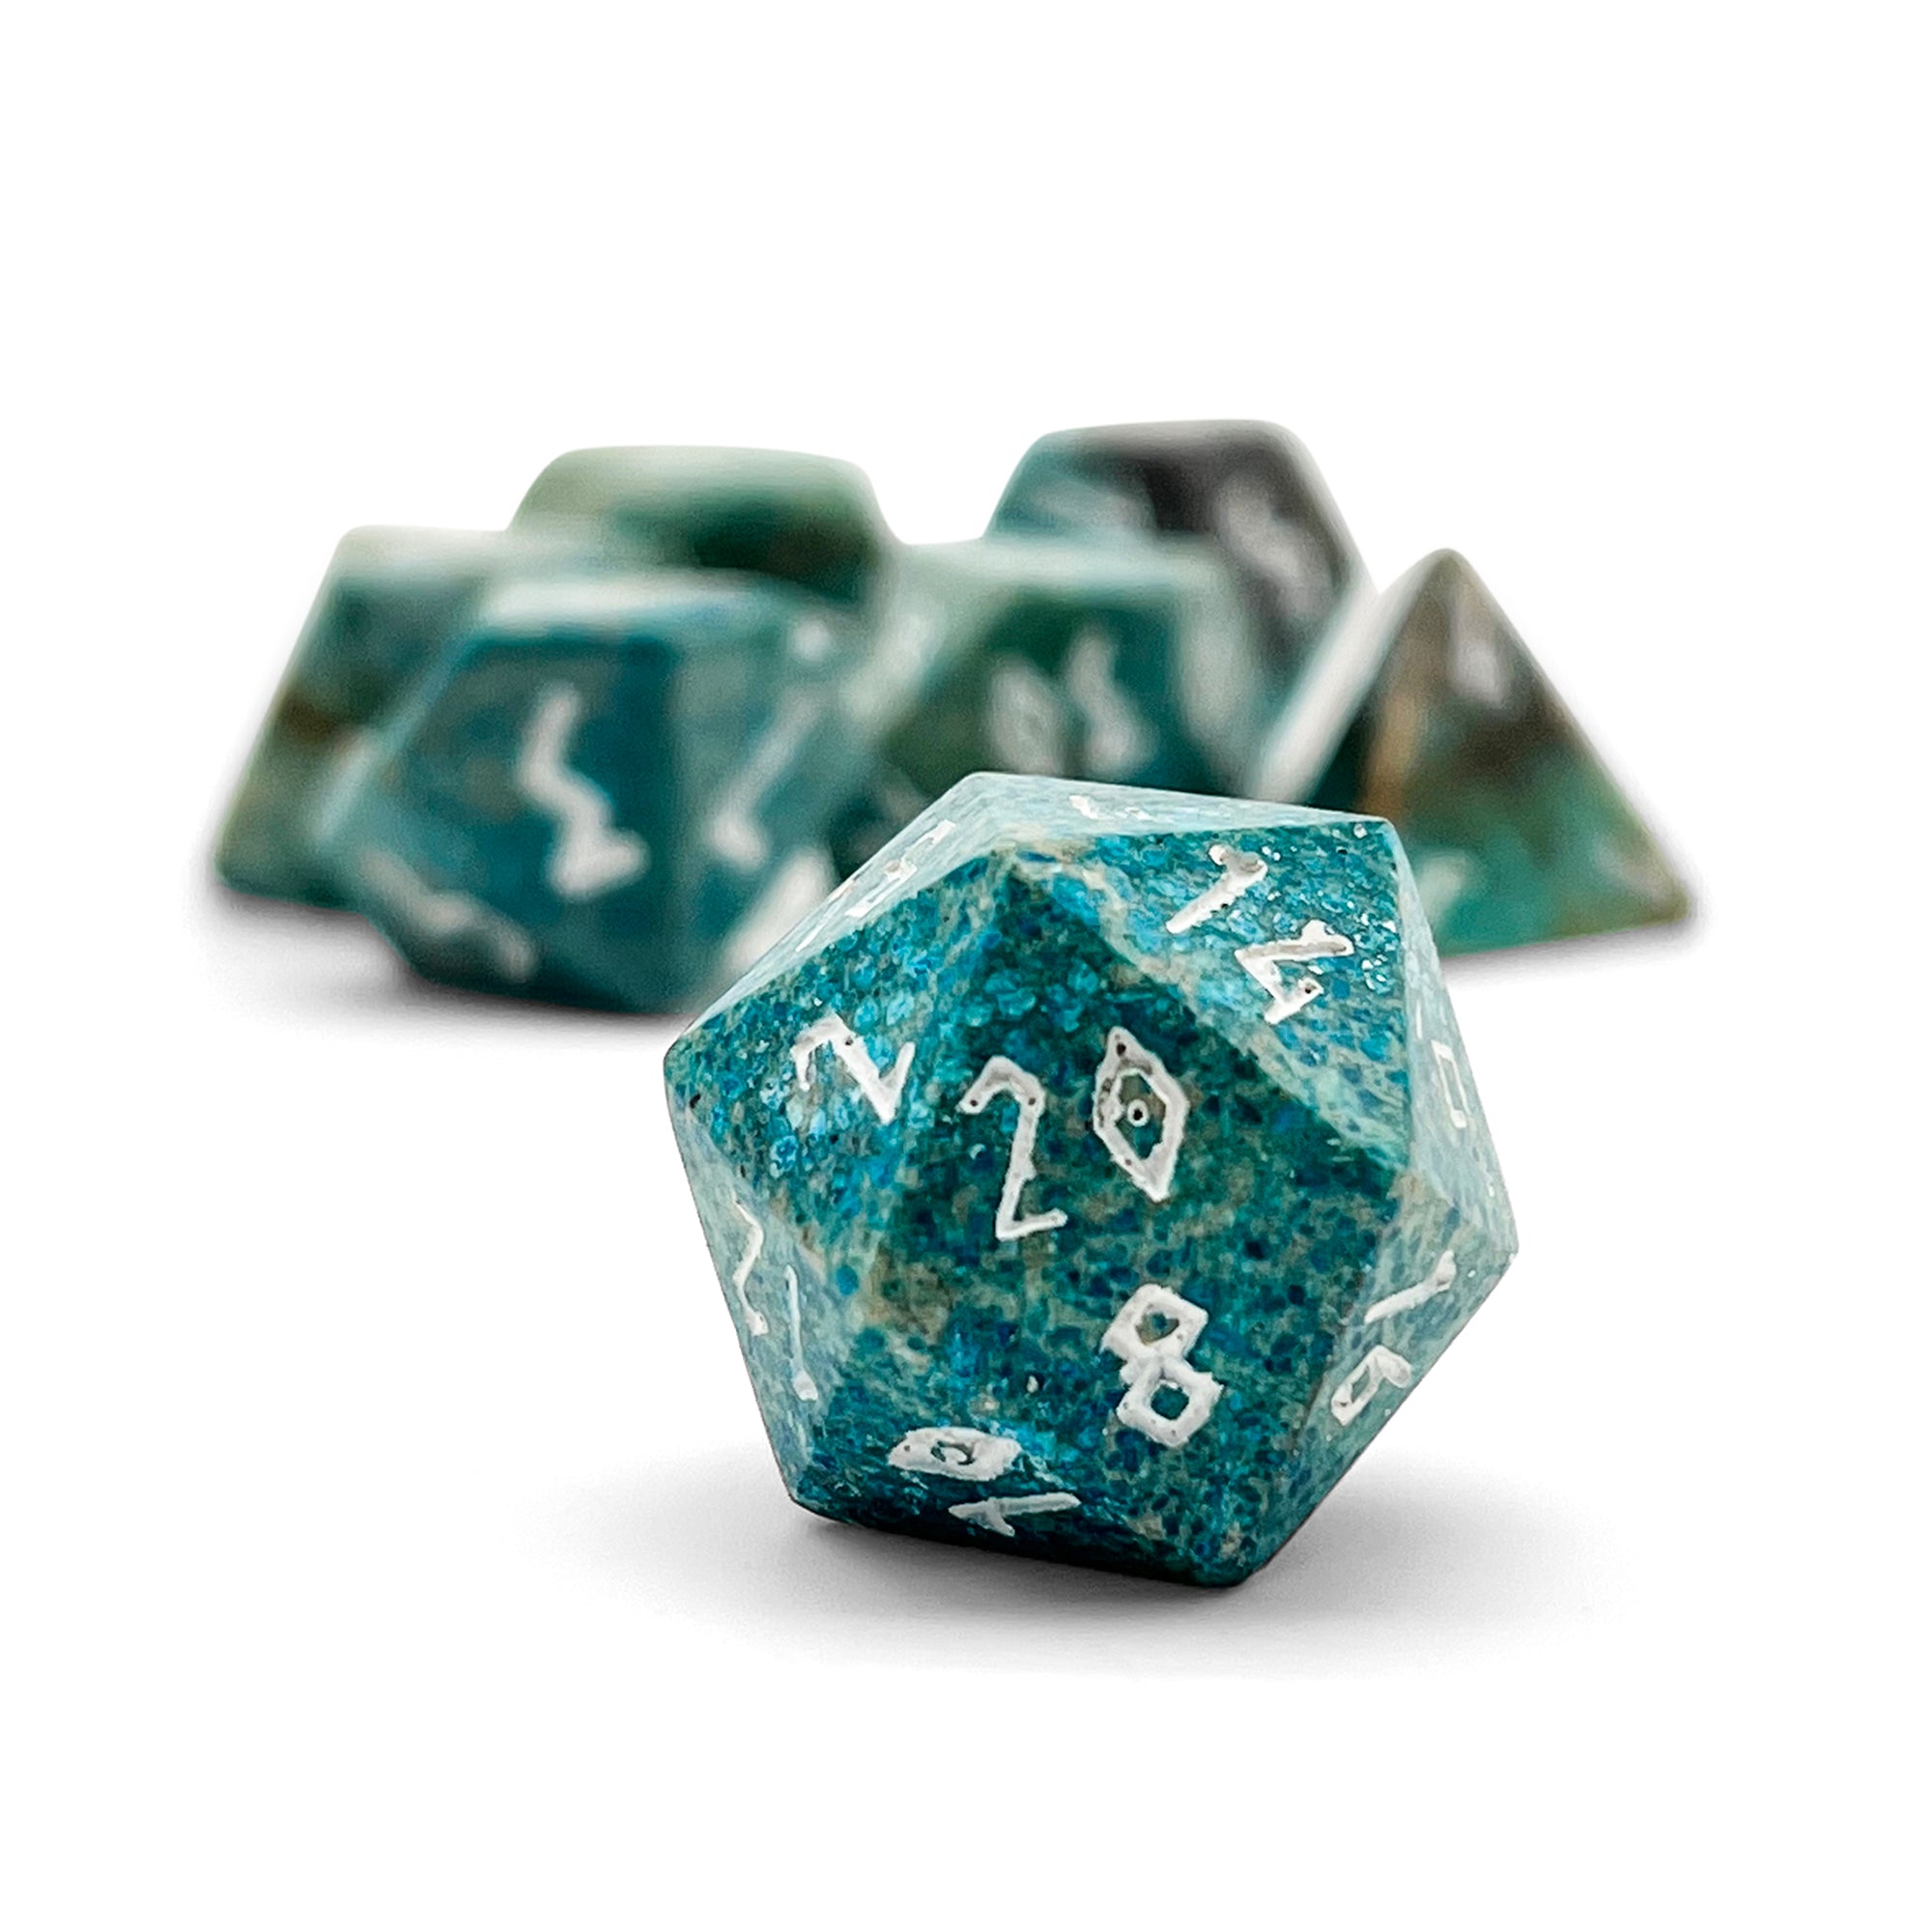 Turquoise Blue Coral Fossil - 7 Piece RPG Set Gemstone Dice